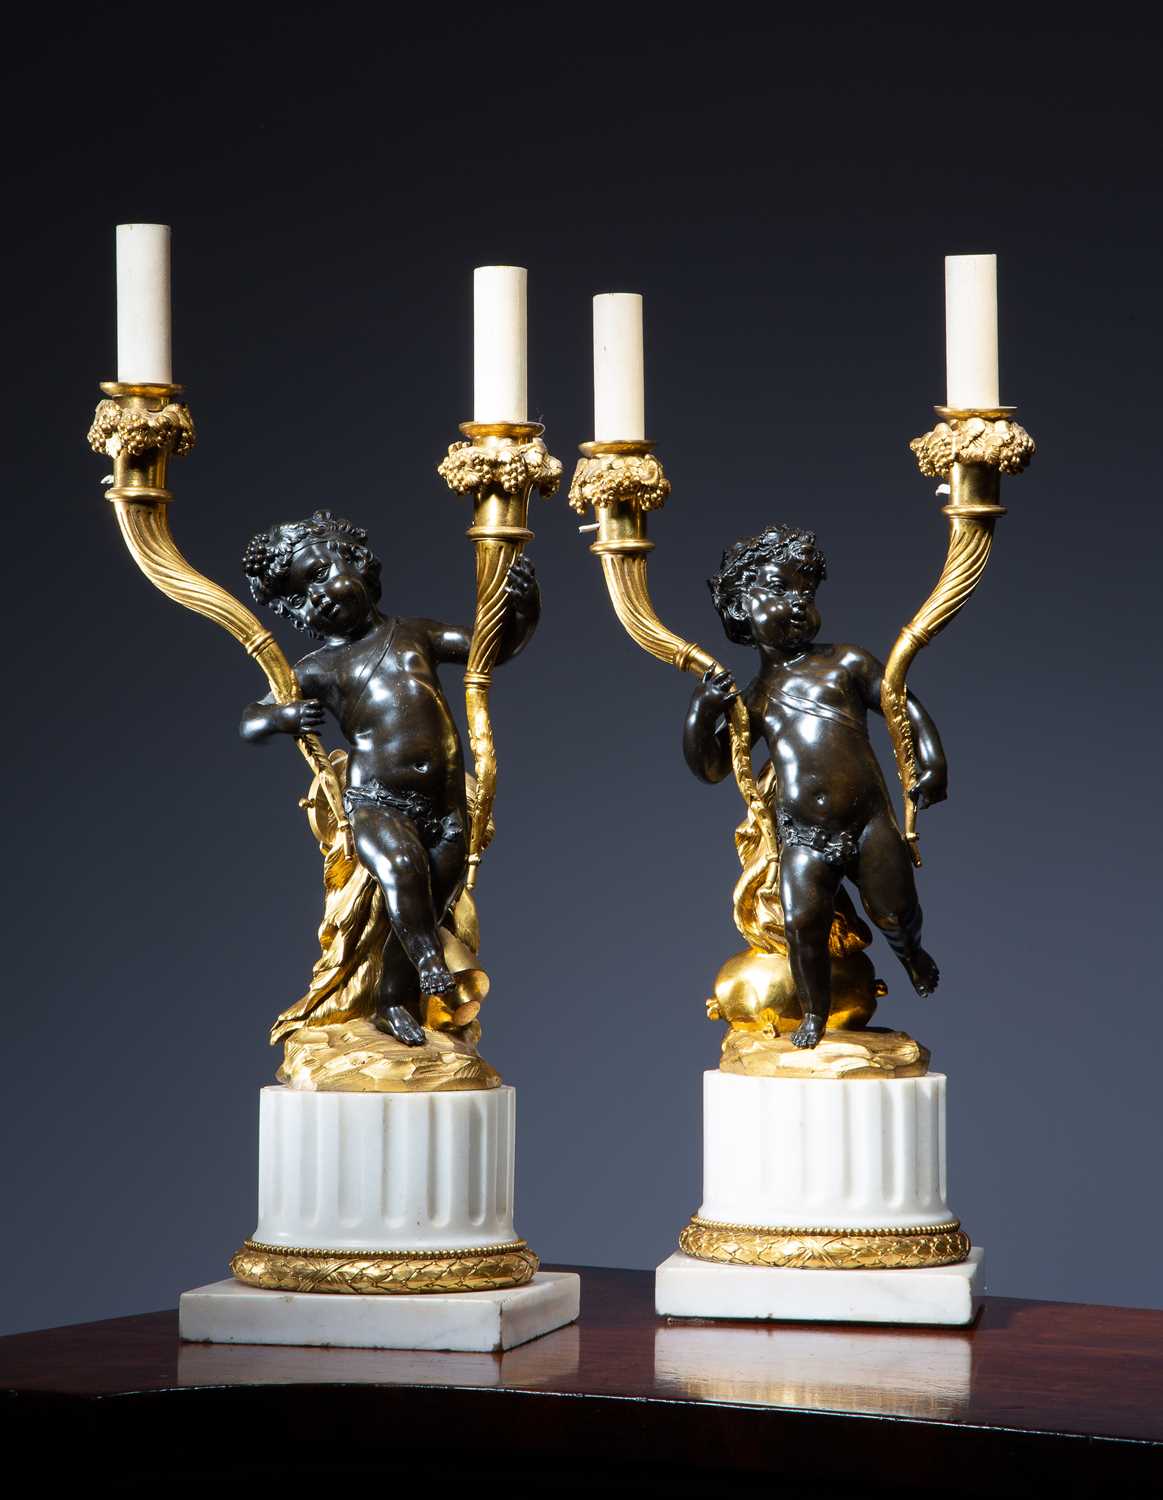 A PAIR OF FRENCH LOUIS XVI GILT AND PATINATED BRONZE CANDELABRA AFTER CLAUDE MICHEL, KNOWN AS